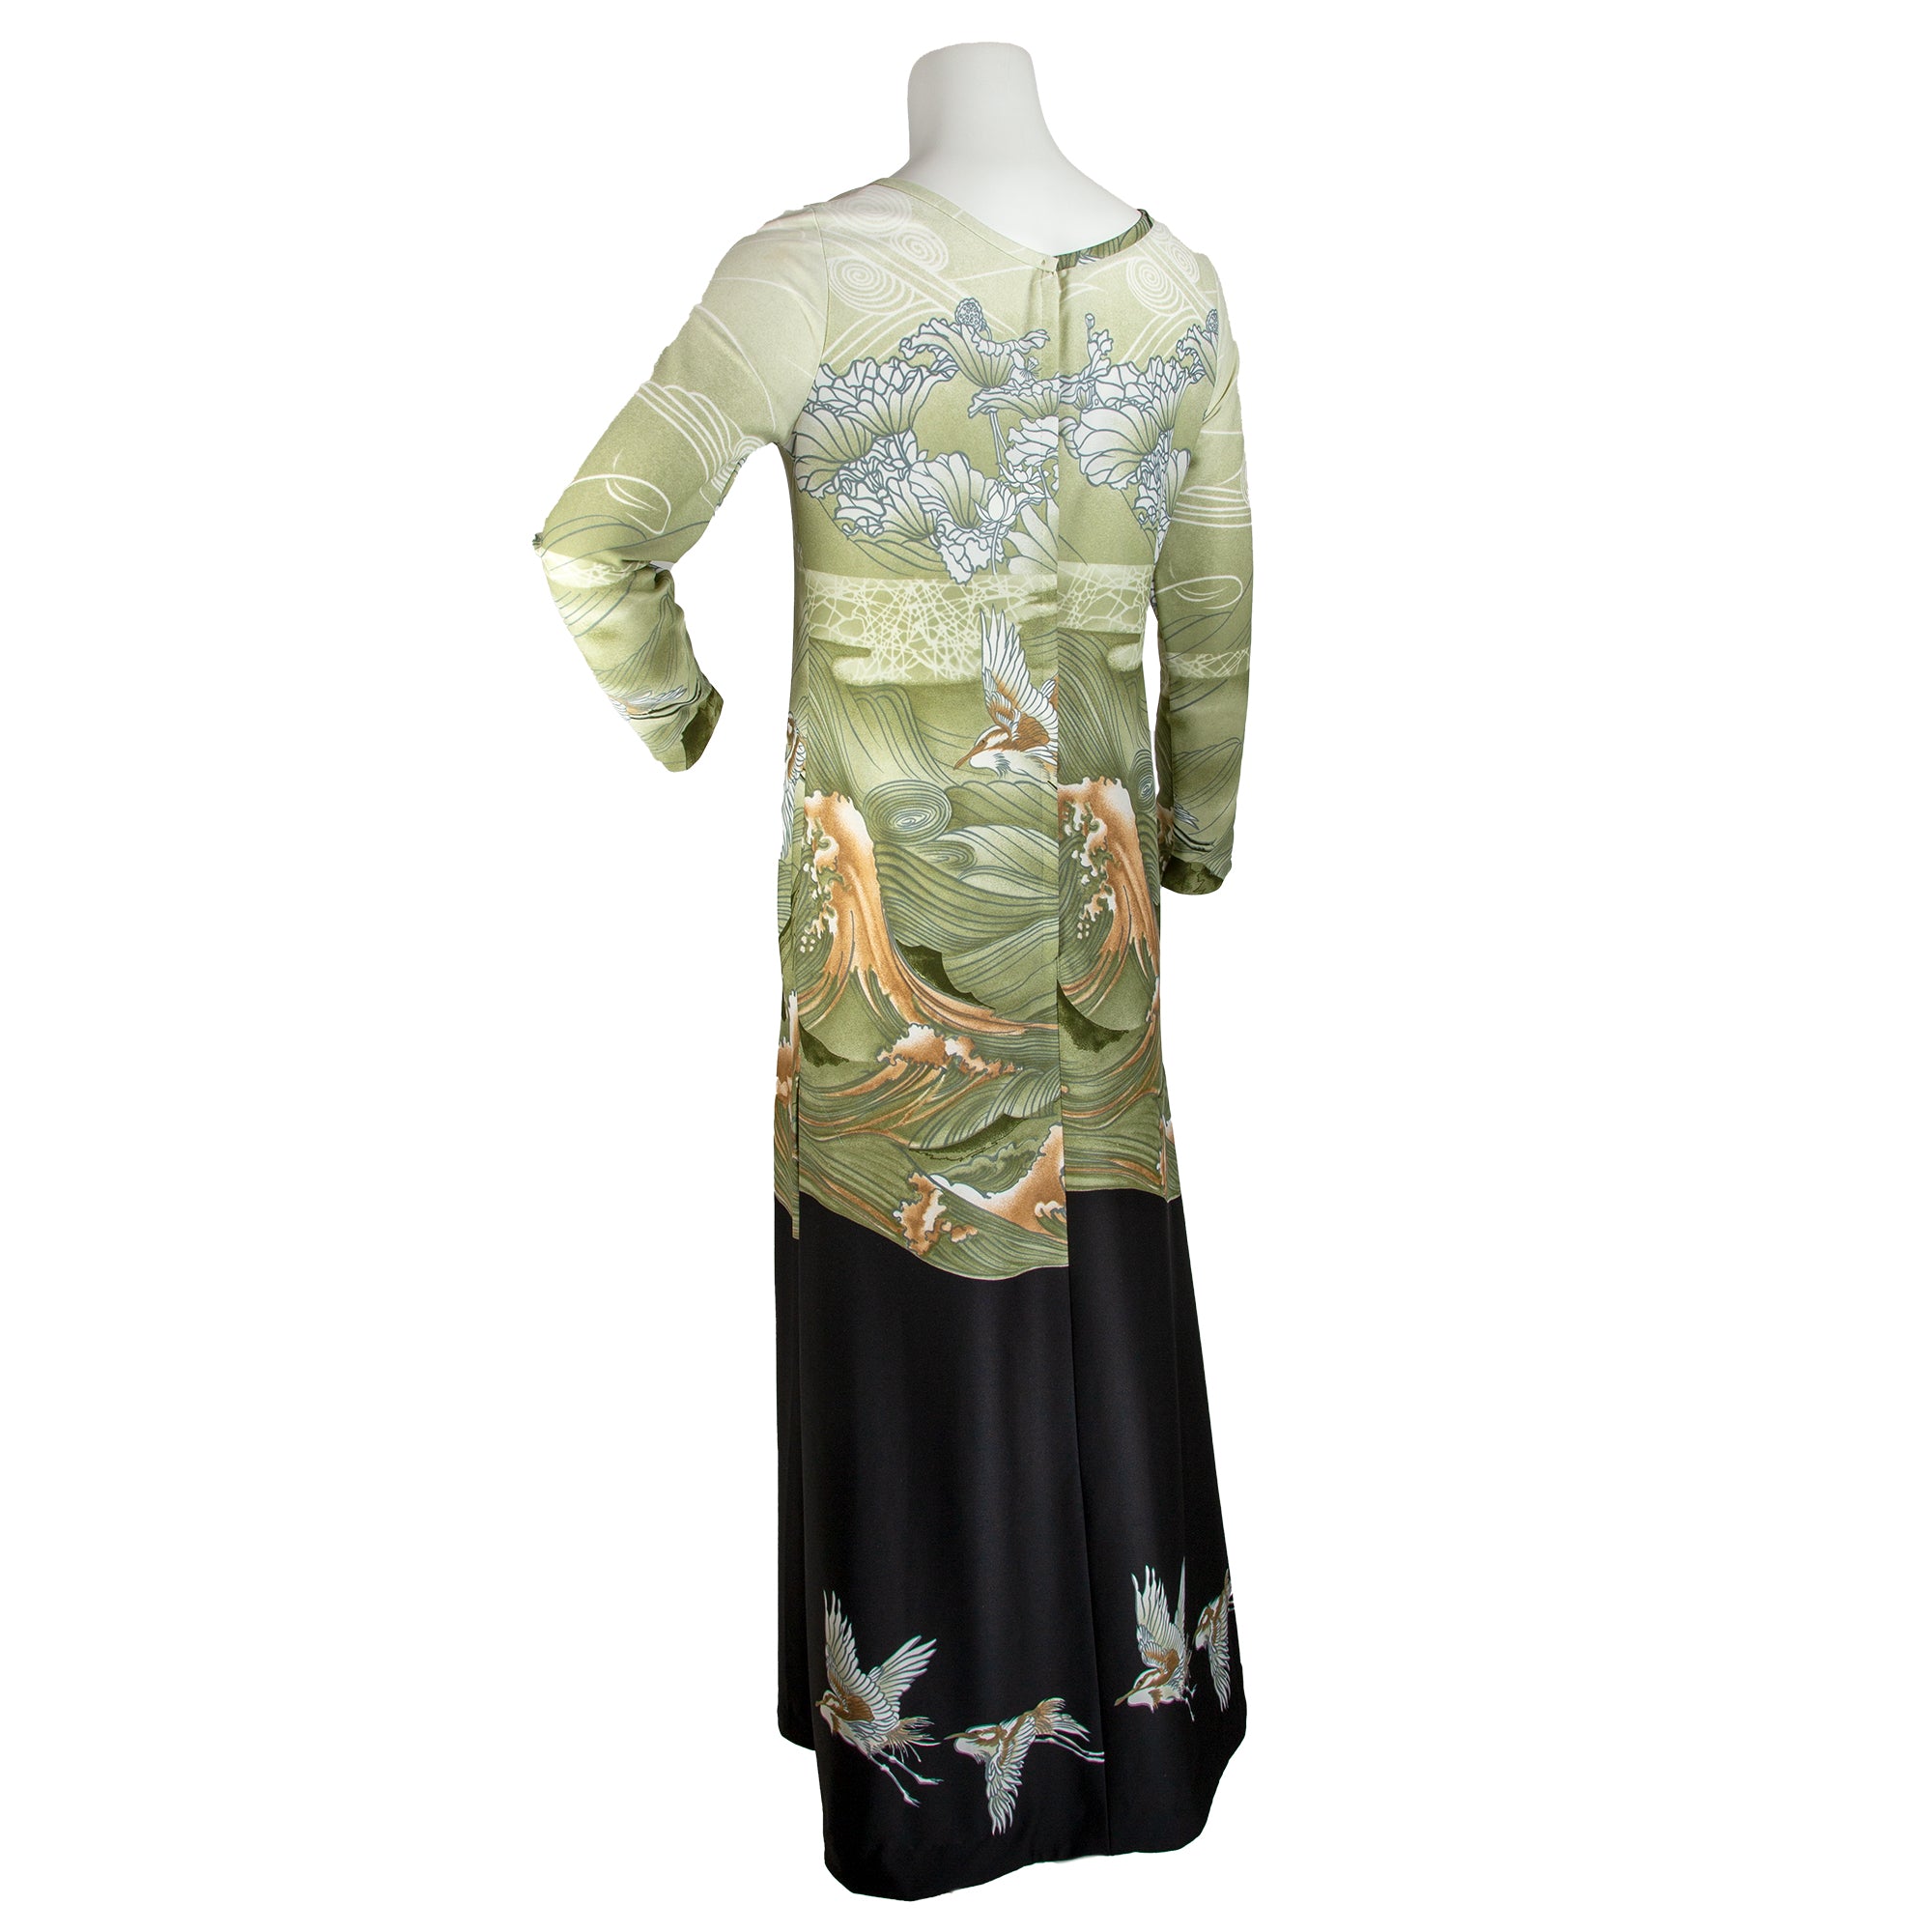 70s Toni Todd Maxi Dress - Asian Inspired Graphic